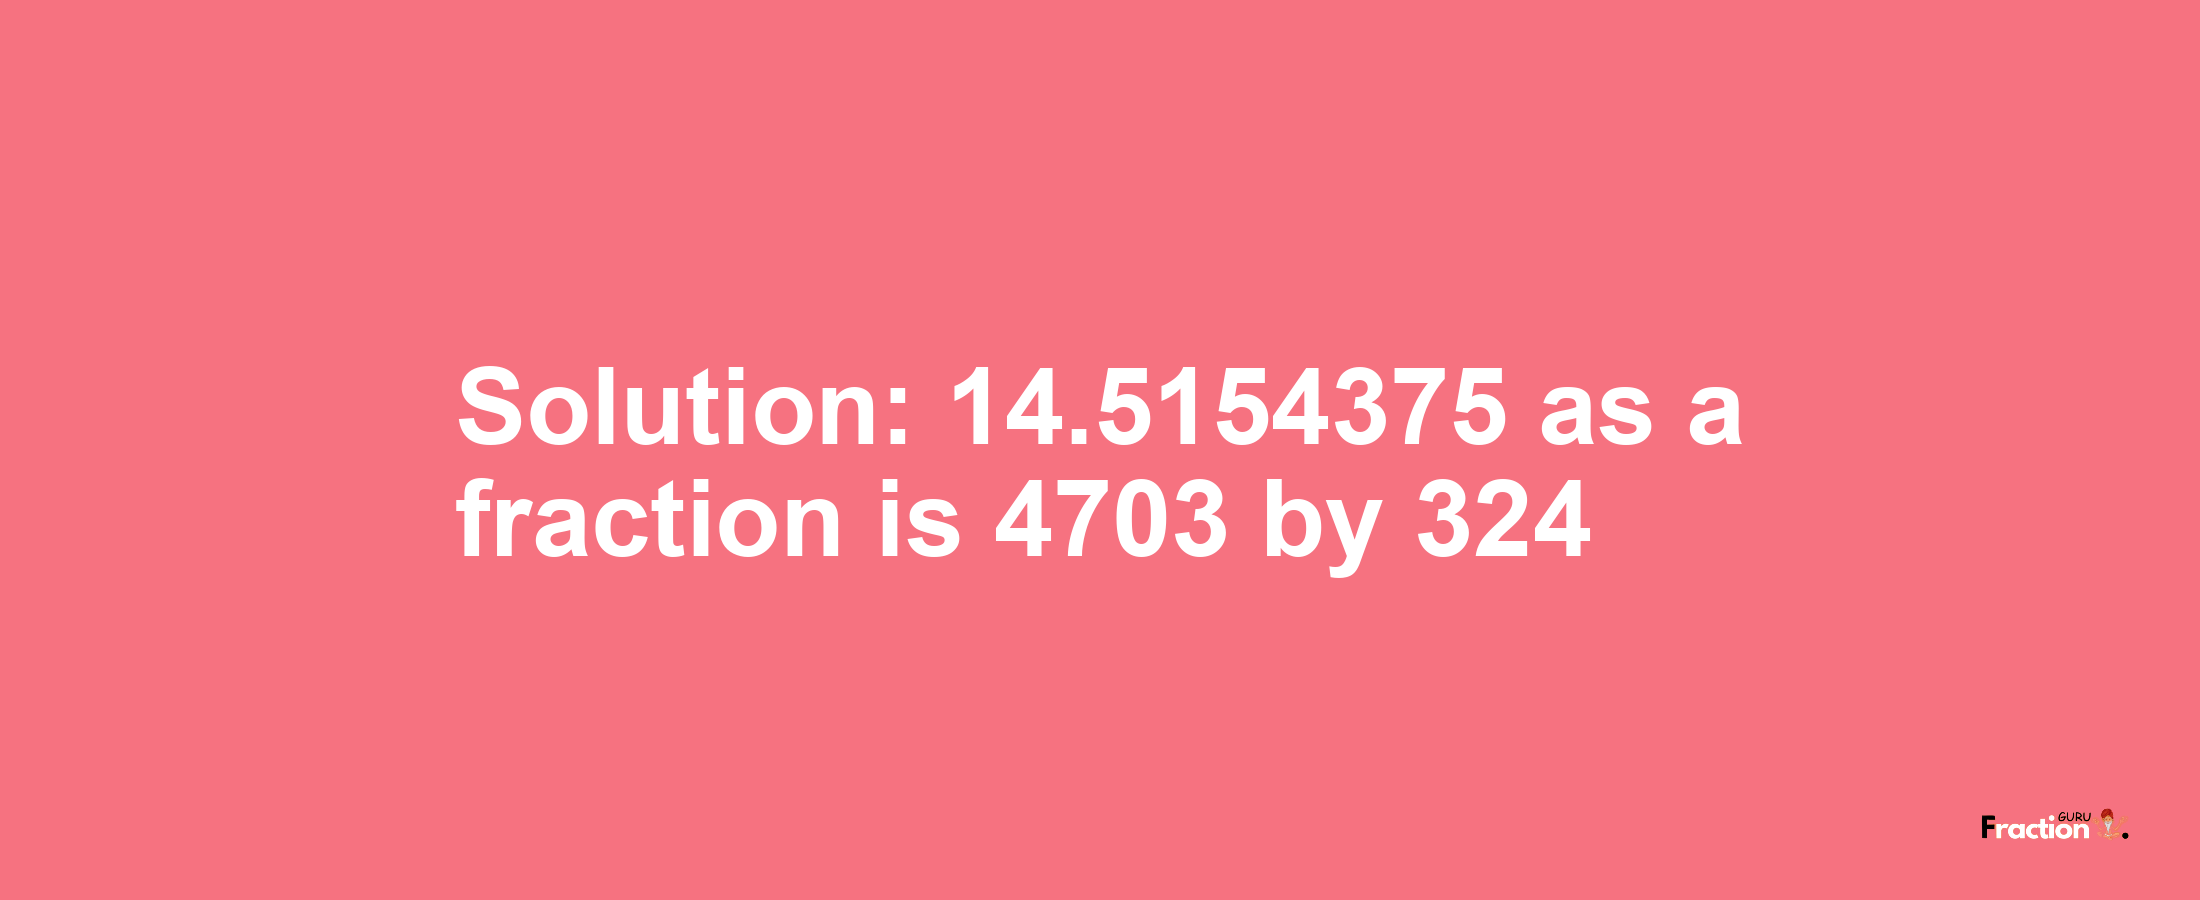 Solution:14.5154375 as a fraction is 4703/324